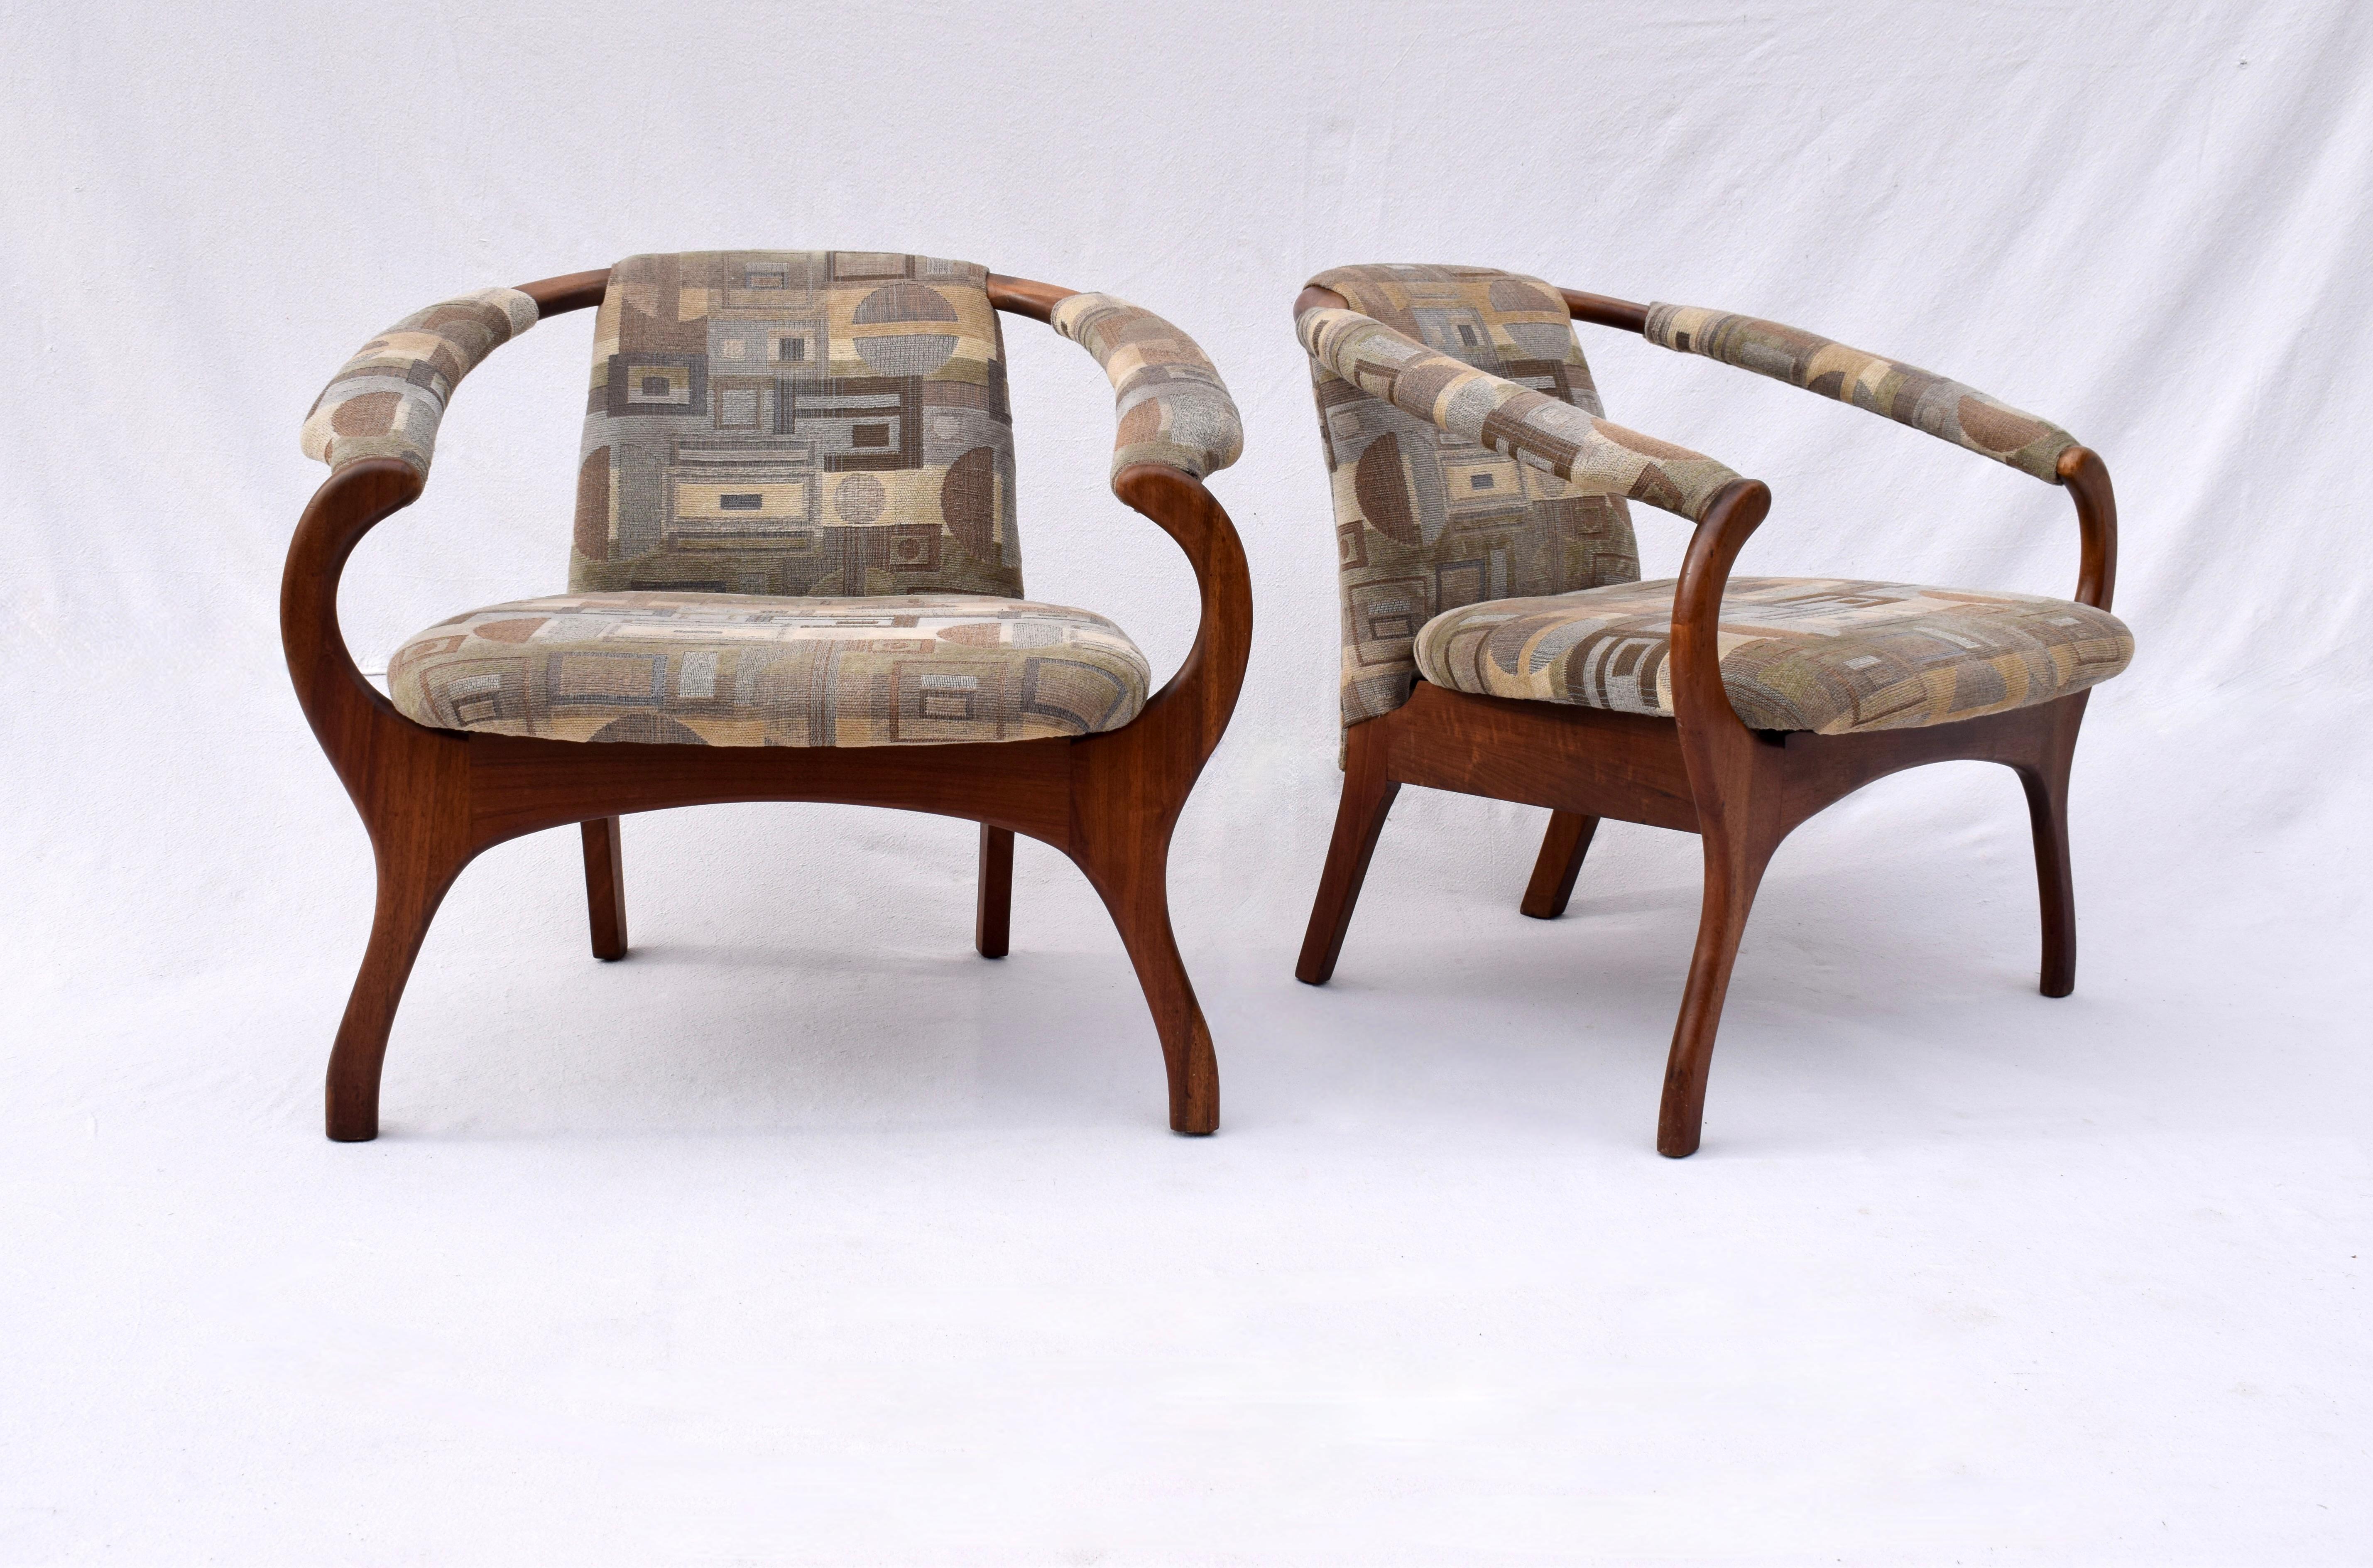 Scarcely seen pair of solid walnut club / lounge chairs attributed to Adrian Pearsall c. 1970's. All original in beautifully maintained condition; ready for use. seats: 16